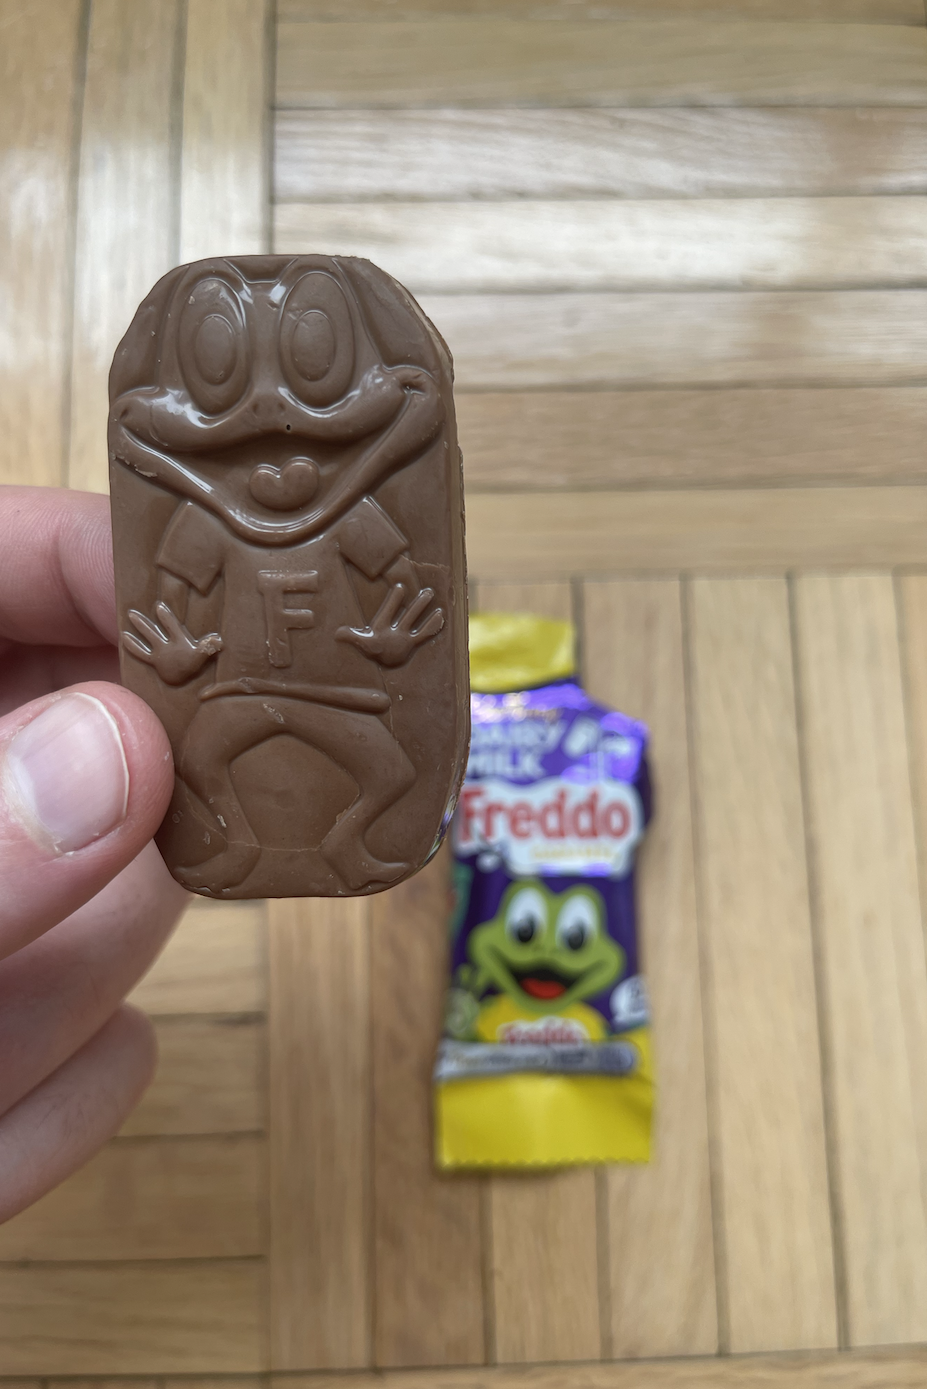 Hand holding a Freddo chocolate bar with another Freddo package in the background